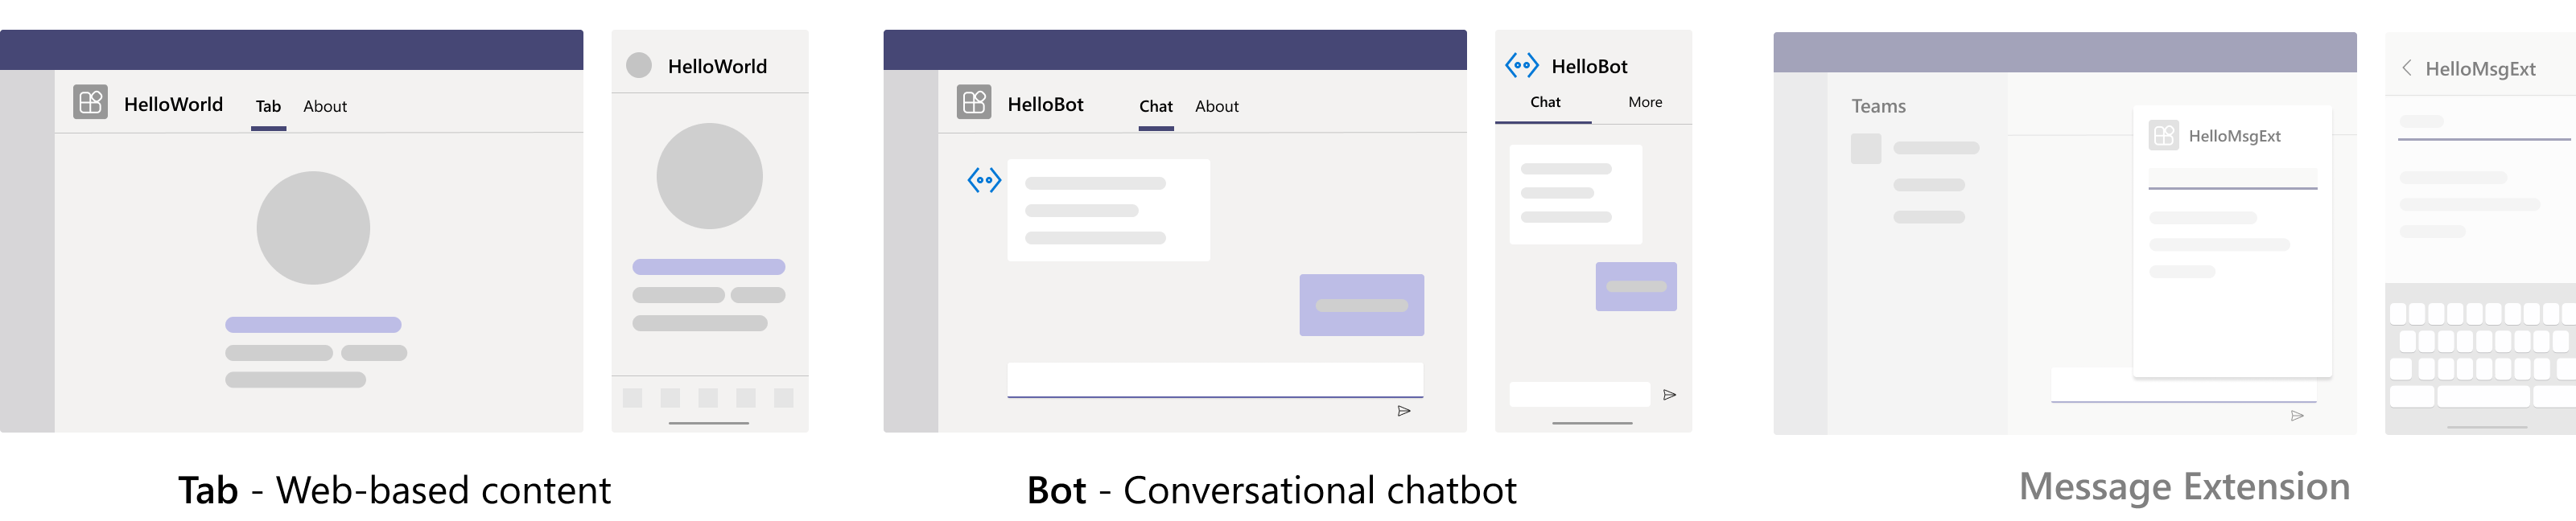 Screenshot of the blazor app displaying the tab, Bot, and Message Extension output after you've successfully completed the step-by-step blazor guide.